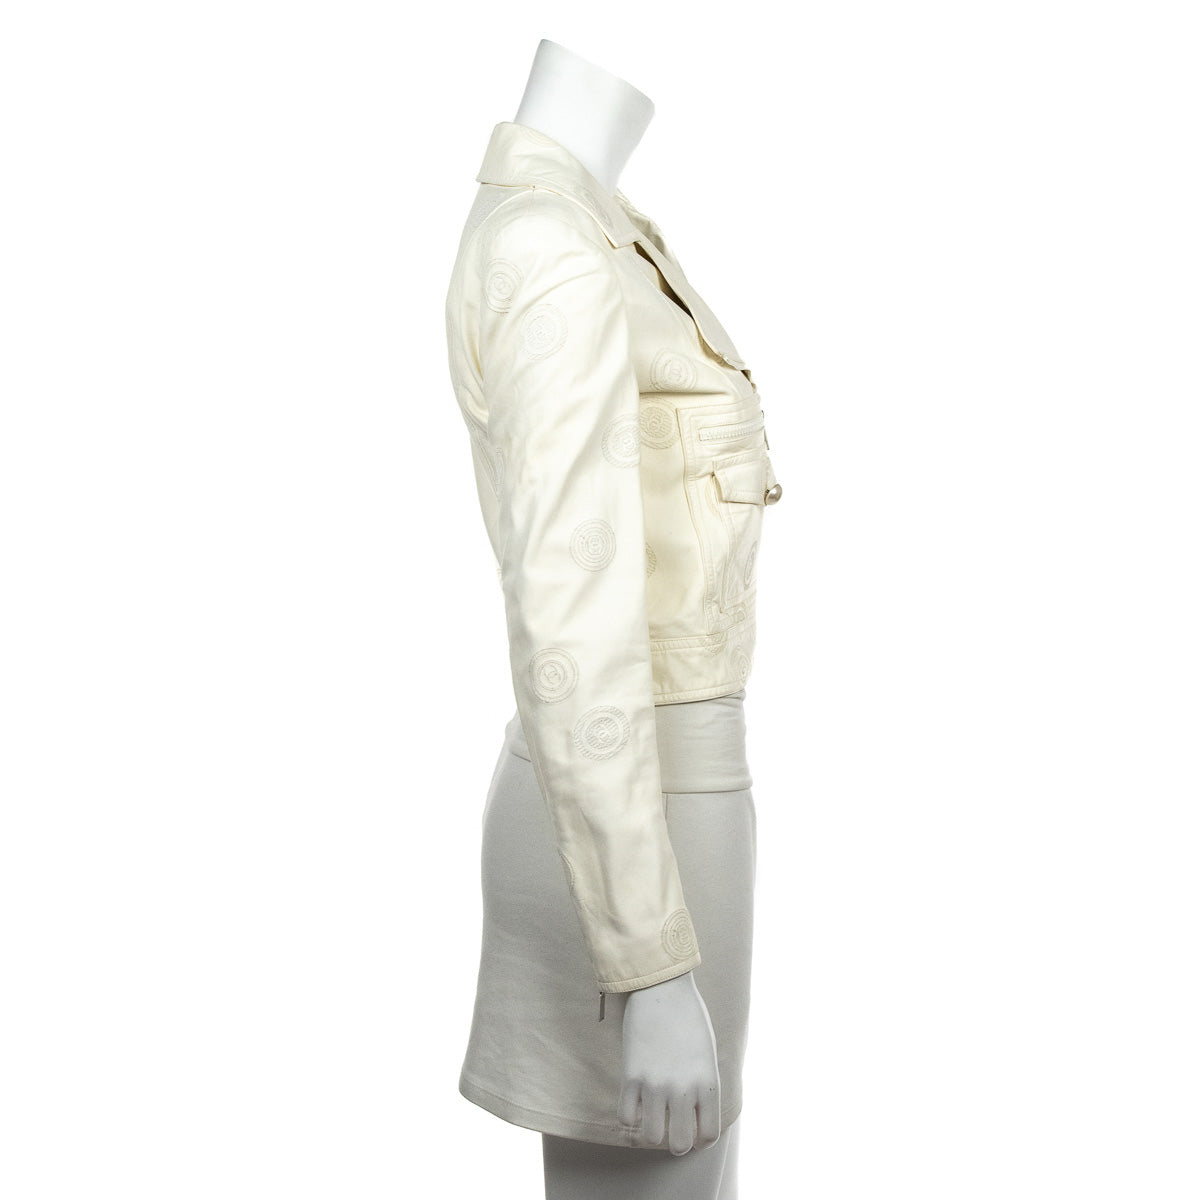 Chanel Ivory Lambskin CC Moto Jacket Size S | FR 38 - Love that Bag etc - Preowned Authentic Designer Handbags & Preloved Fashions